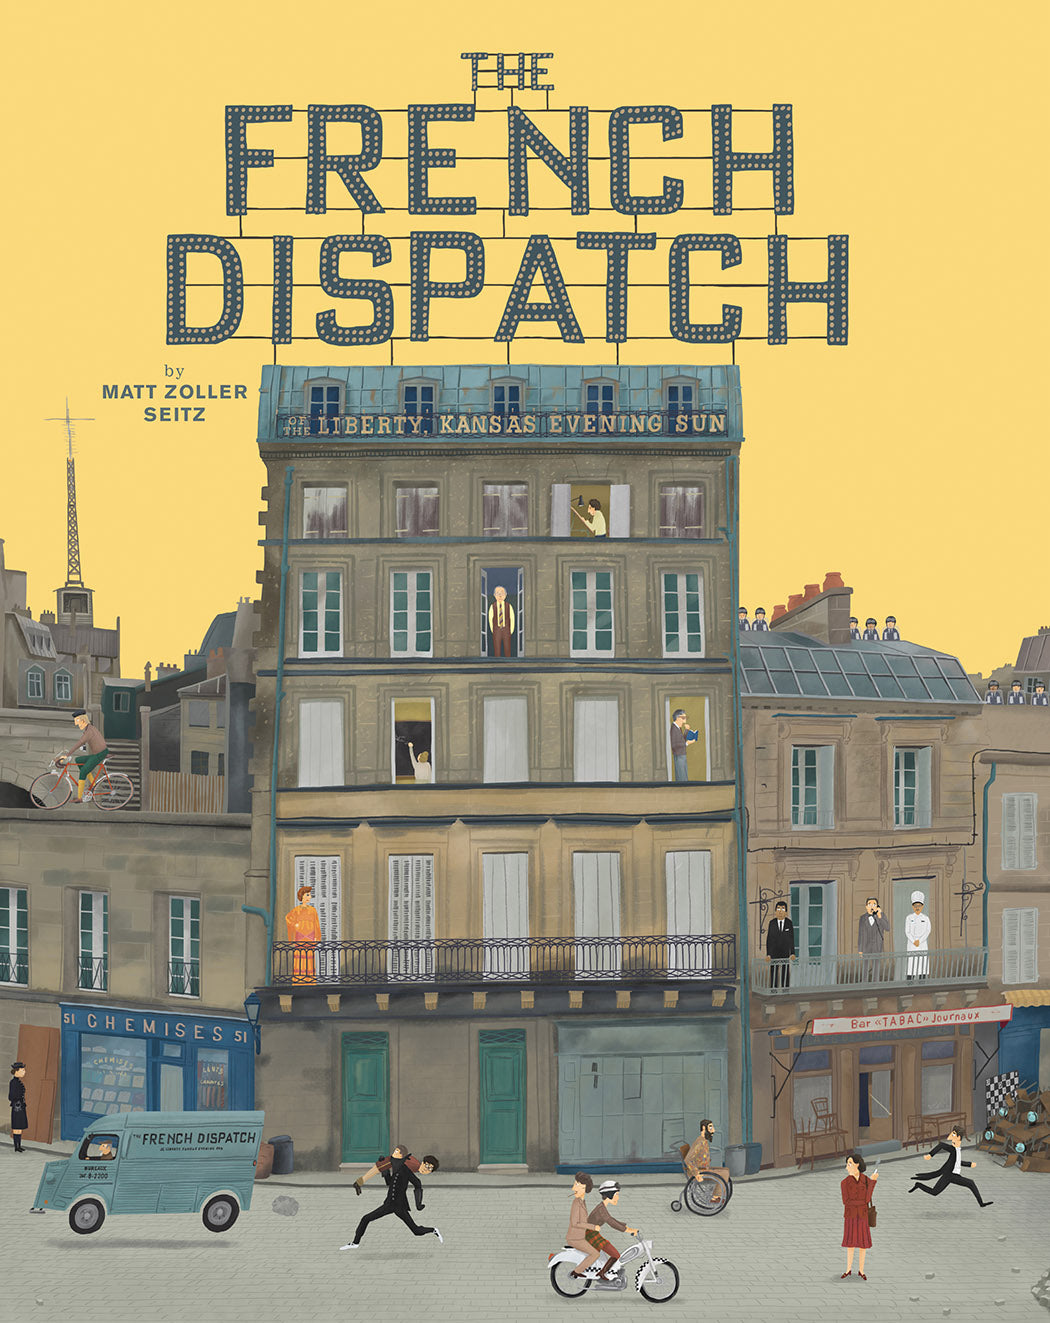 "The Wes Anderson Collection: The French Dispatch" Hardcover